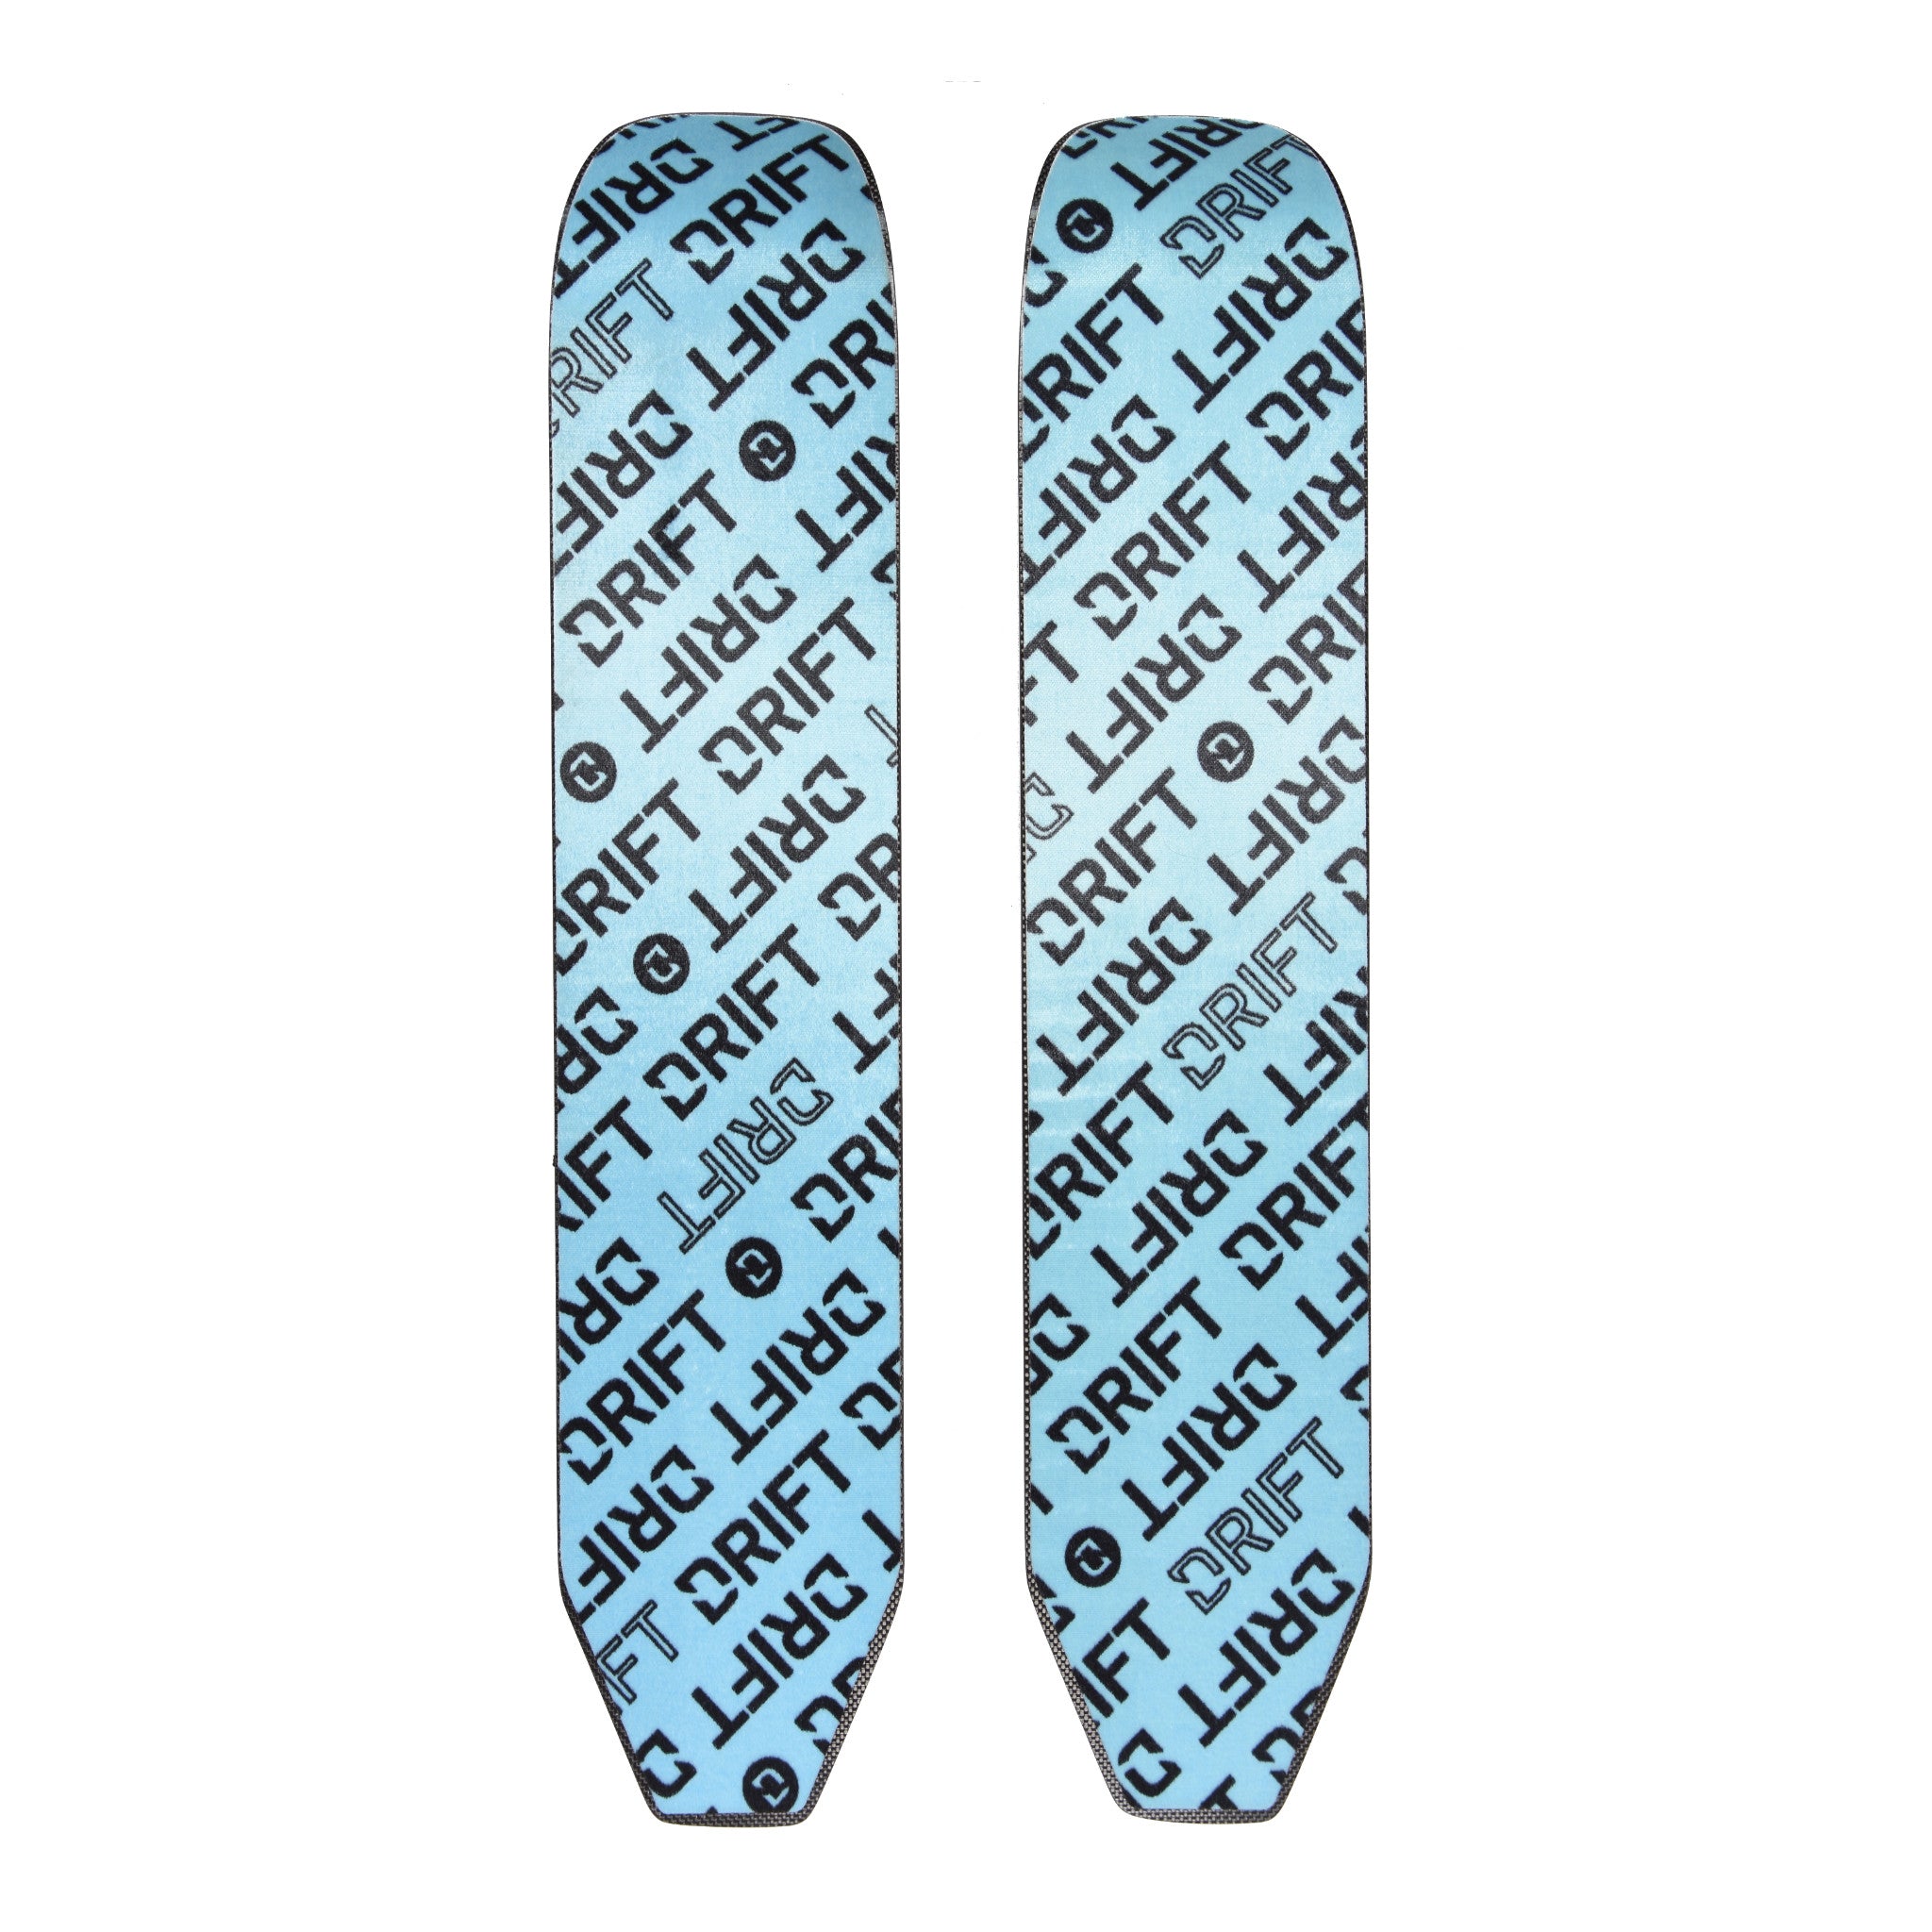 Drift Boards - Snowshoe for Snowboarders and Backcountry Travel